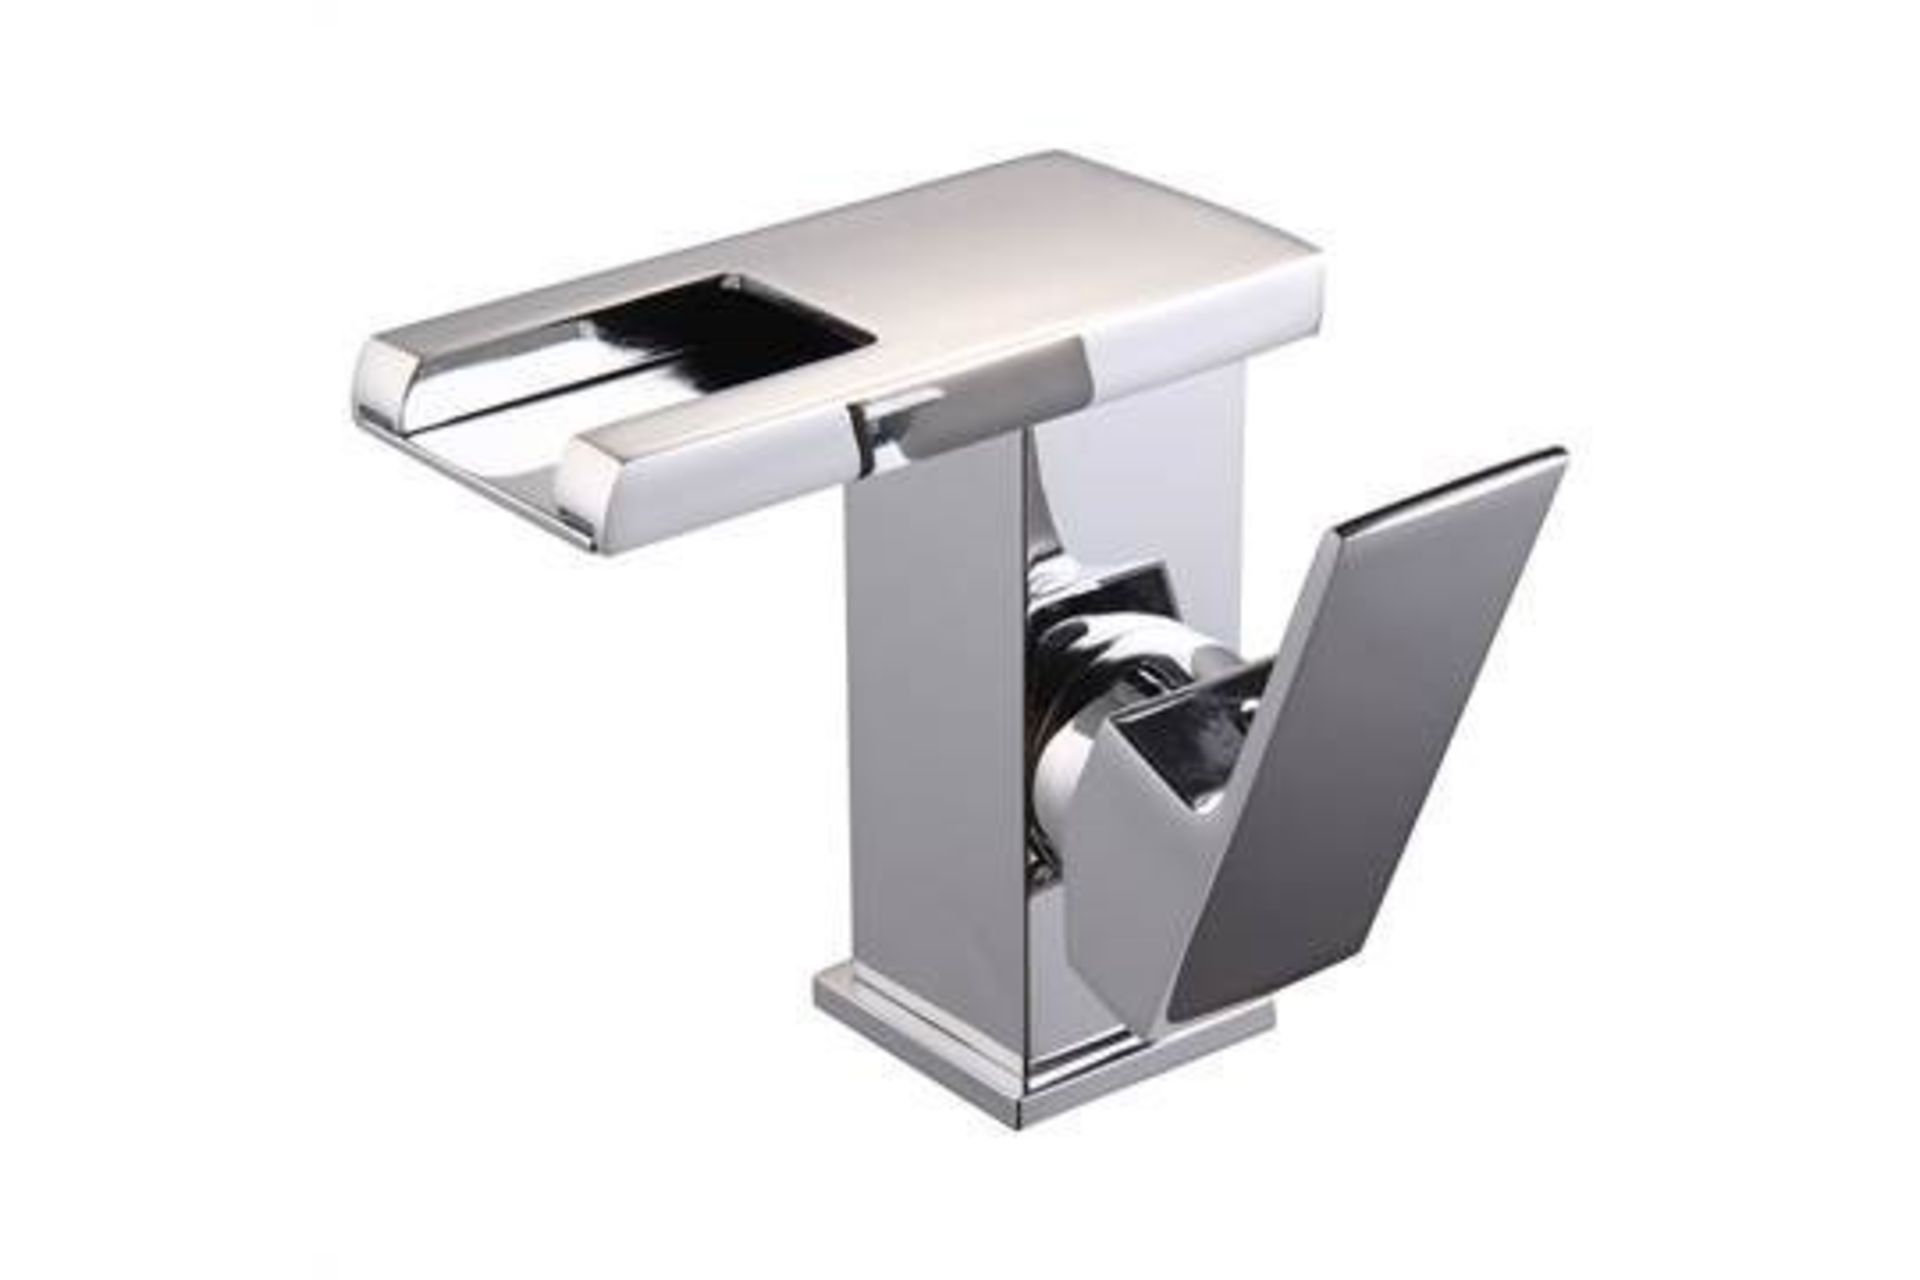 PALLET TO CONTAIN 6 X BRAND NEW BOXED LED Waterfall Bathroom Basin Mixer Tap. RRP £229.99.Easy to - Image 2 of 2